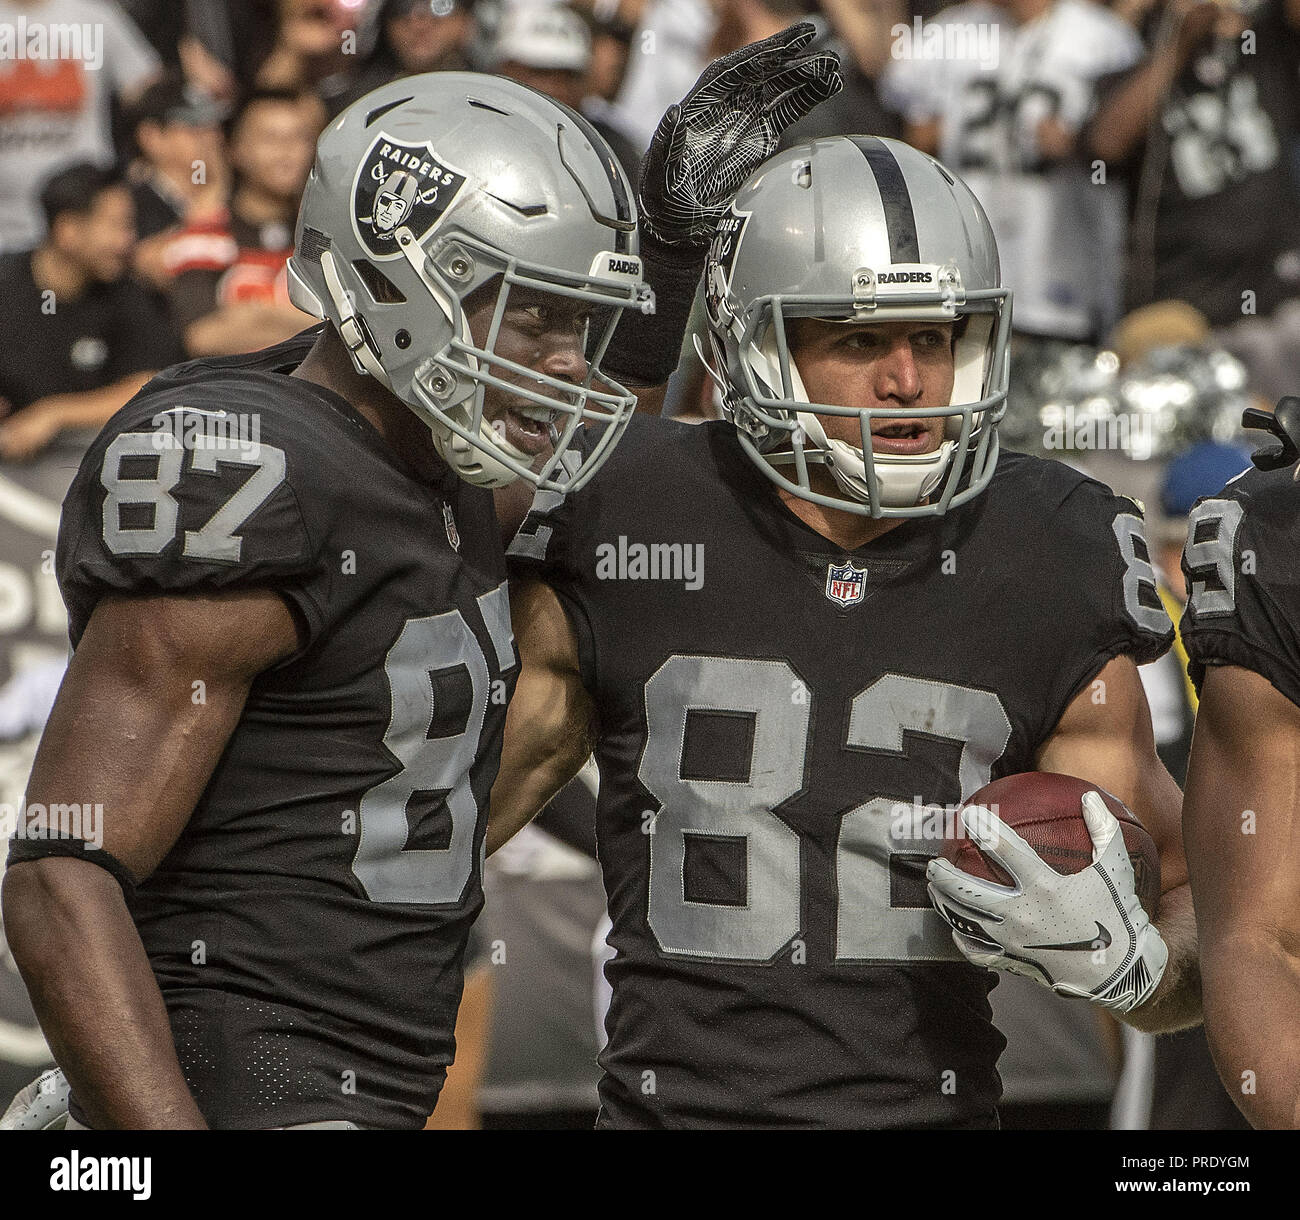 Oakland, California, USA. 30th Sep, 2018. Oakland Raiders tight end Jared  Cook (87) congratulates wide receiver Jordy Nelson (82) on touchdown on  Sunday, September 30, 2018, at Oakland-Alameda County Coliseum in Oakland,